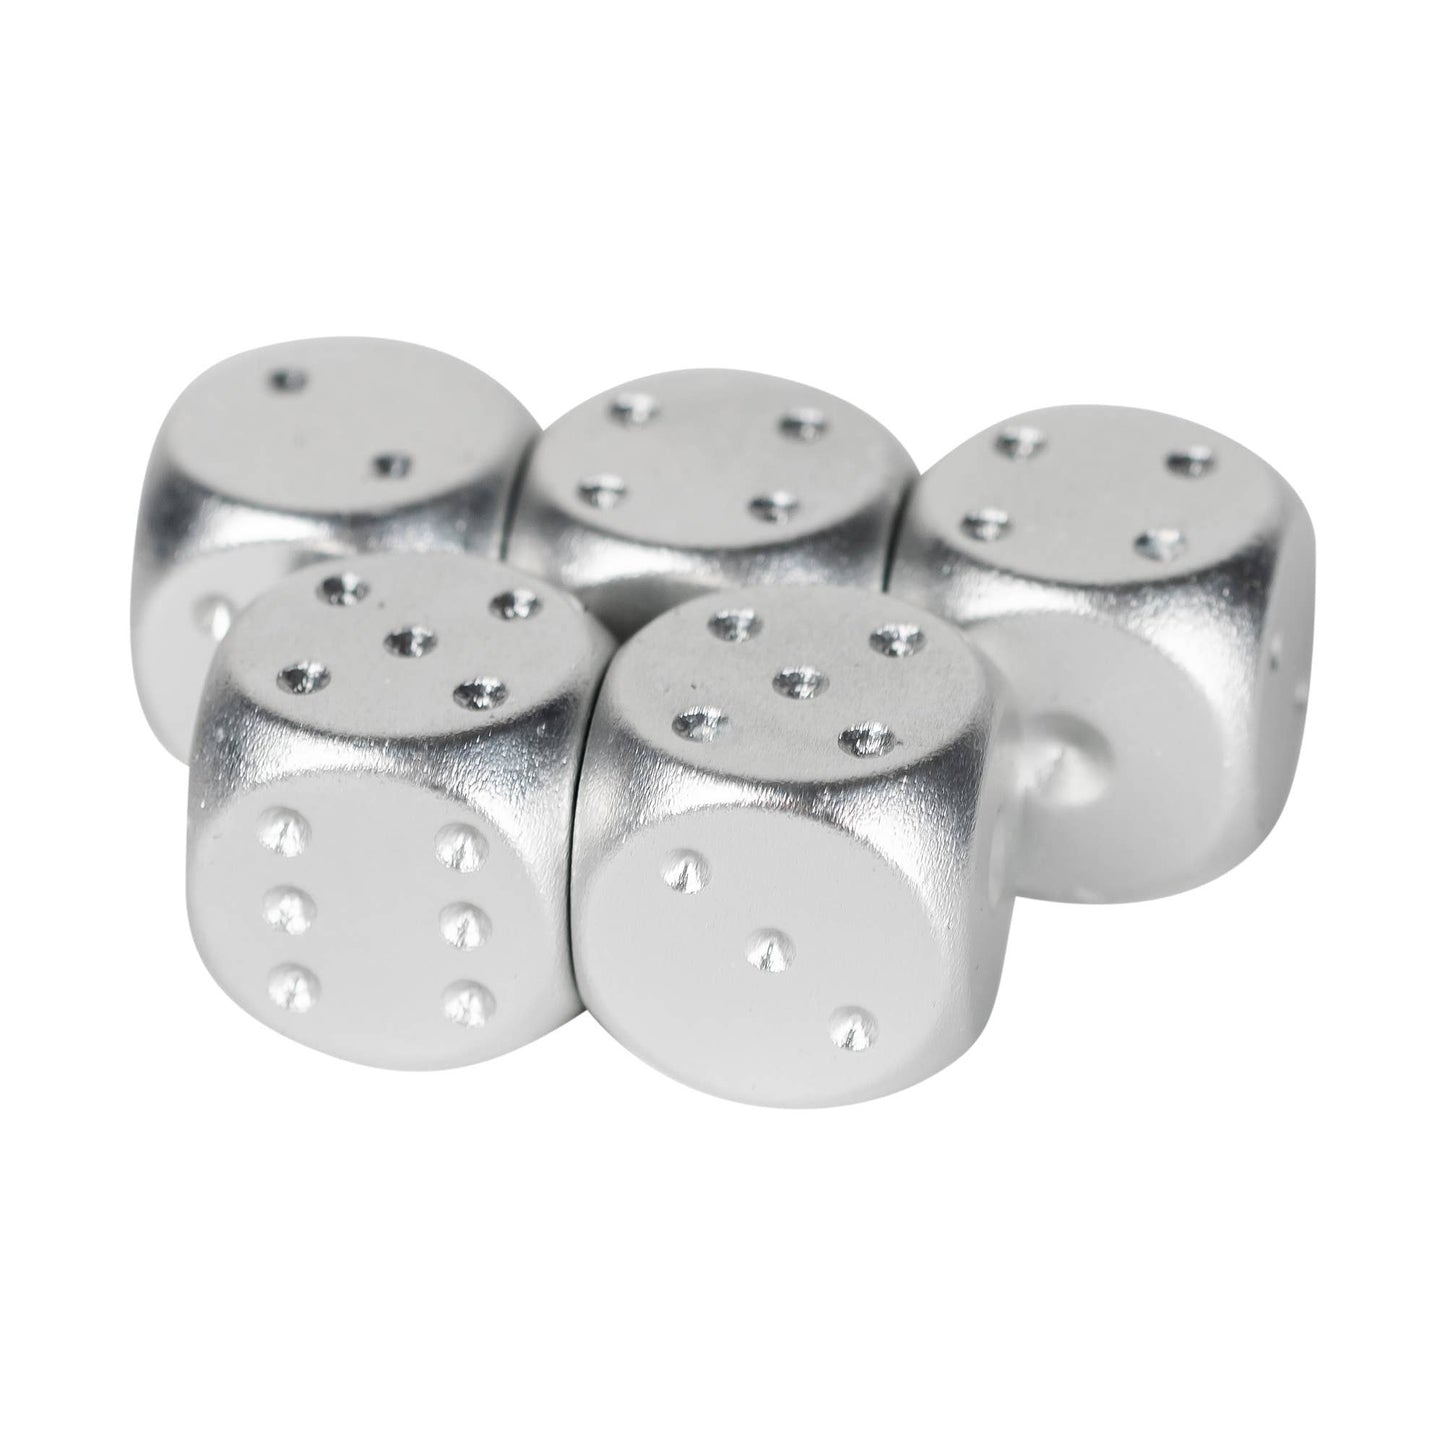 Men's Brushed Stainless Dice Set: Gold